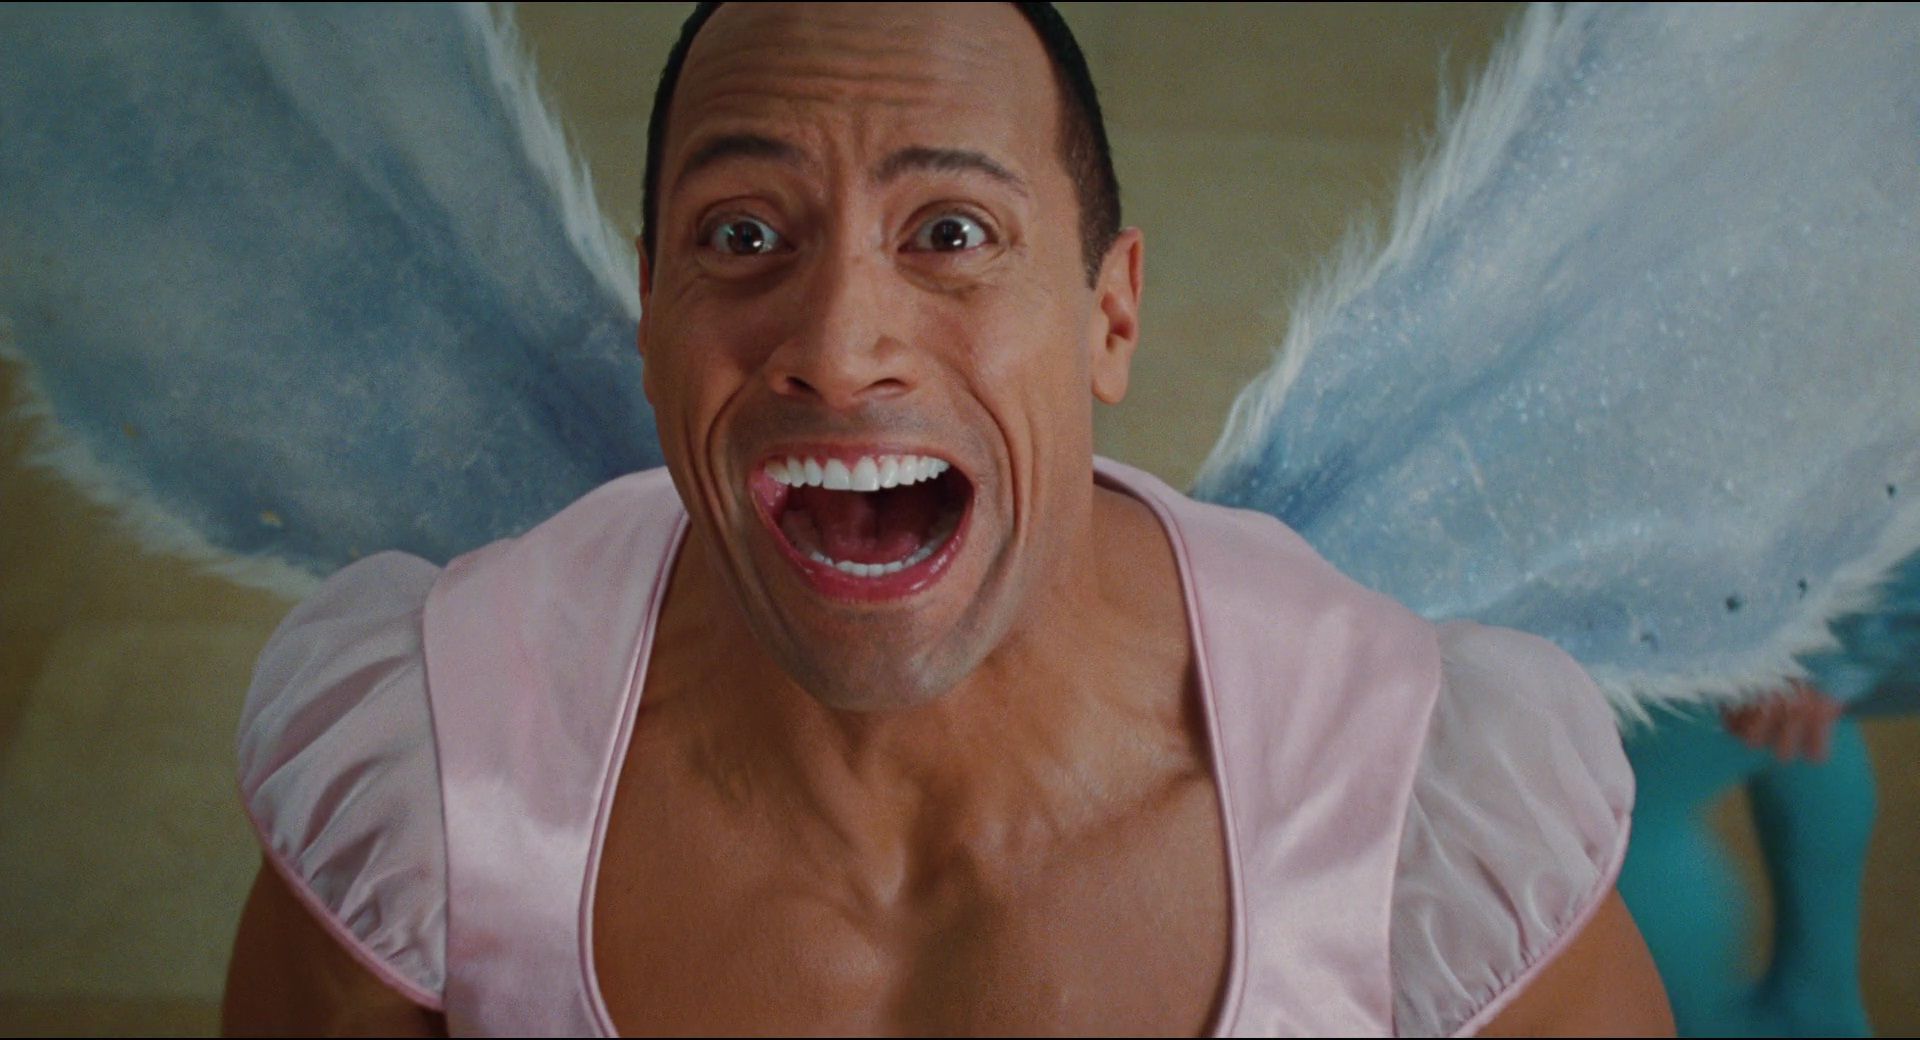 Dwayne Johnson In The Tooth Fairy